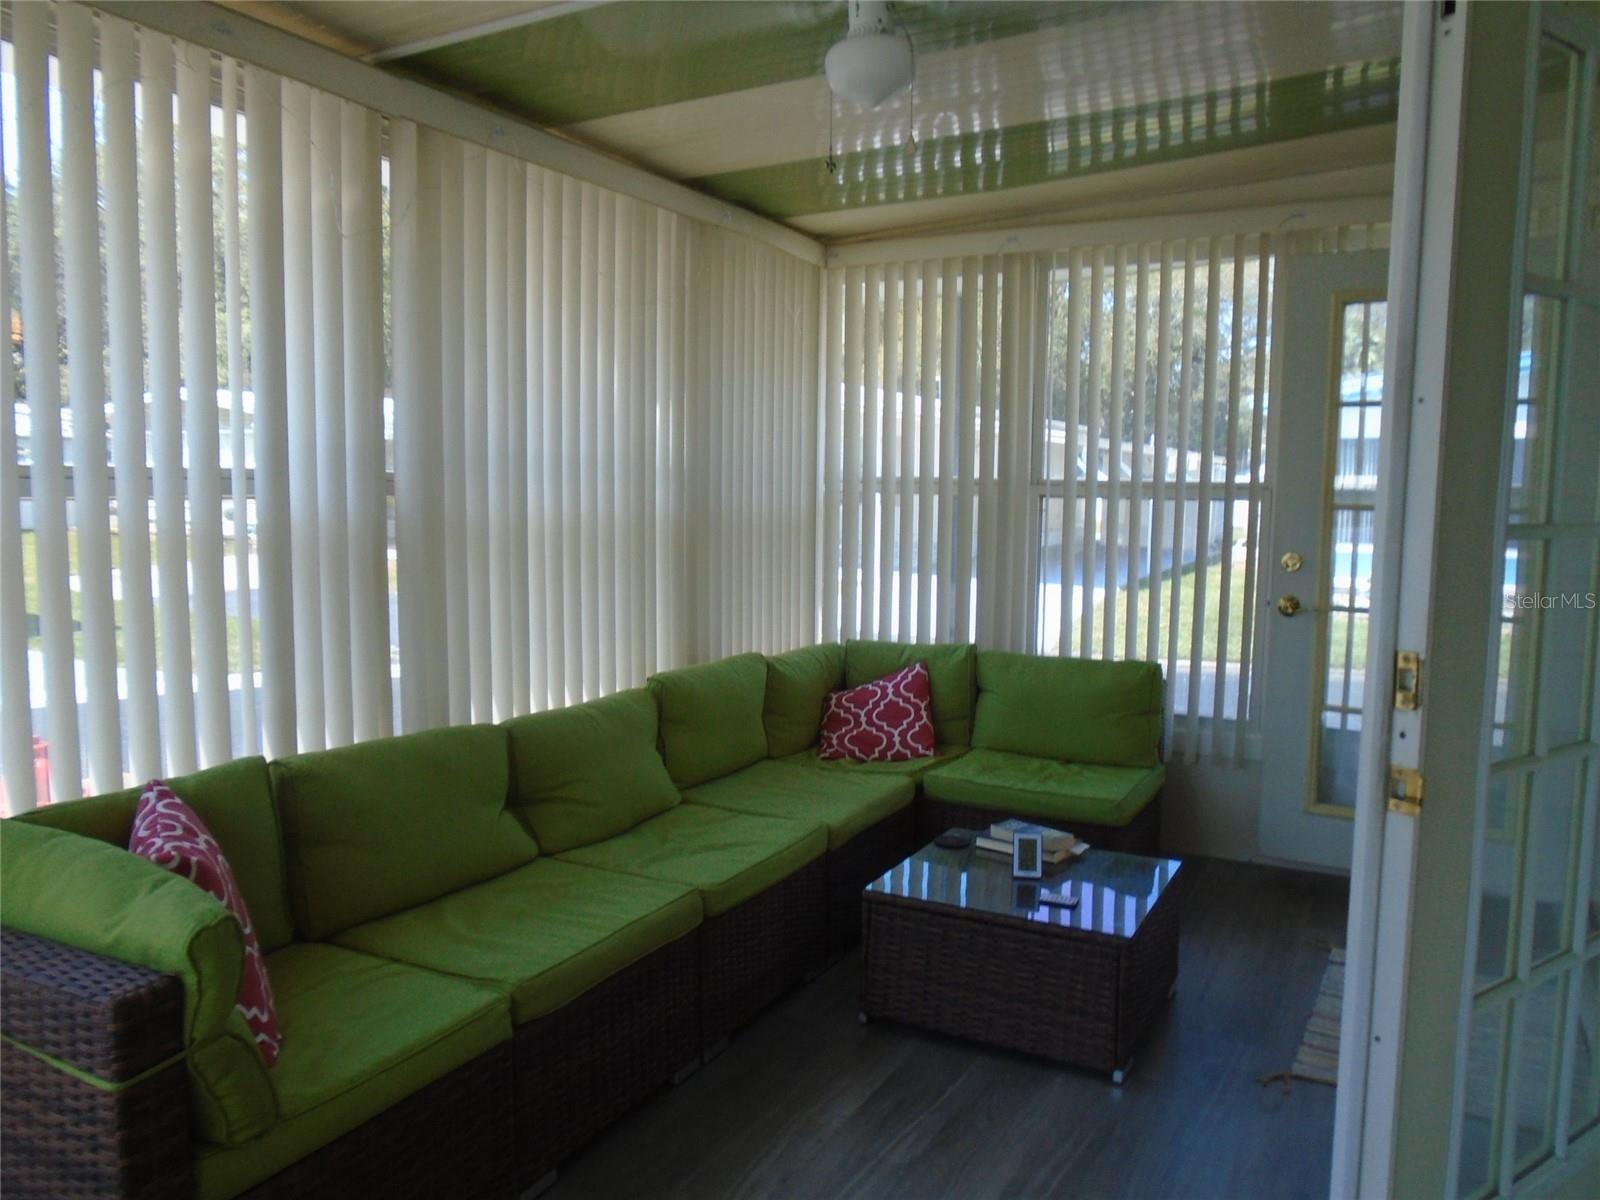 Light, Bright and Air Conditioned Florida Room has French Doors to the Main House